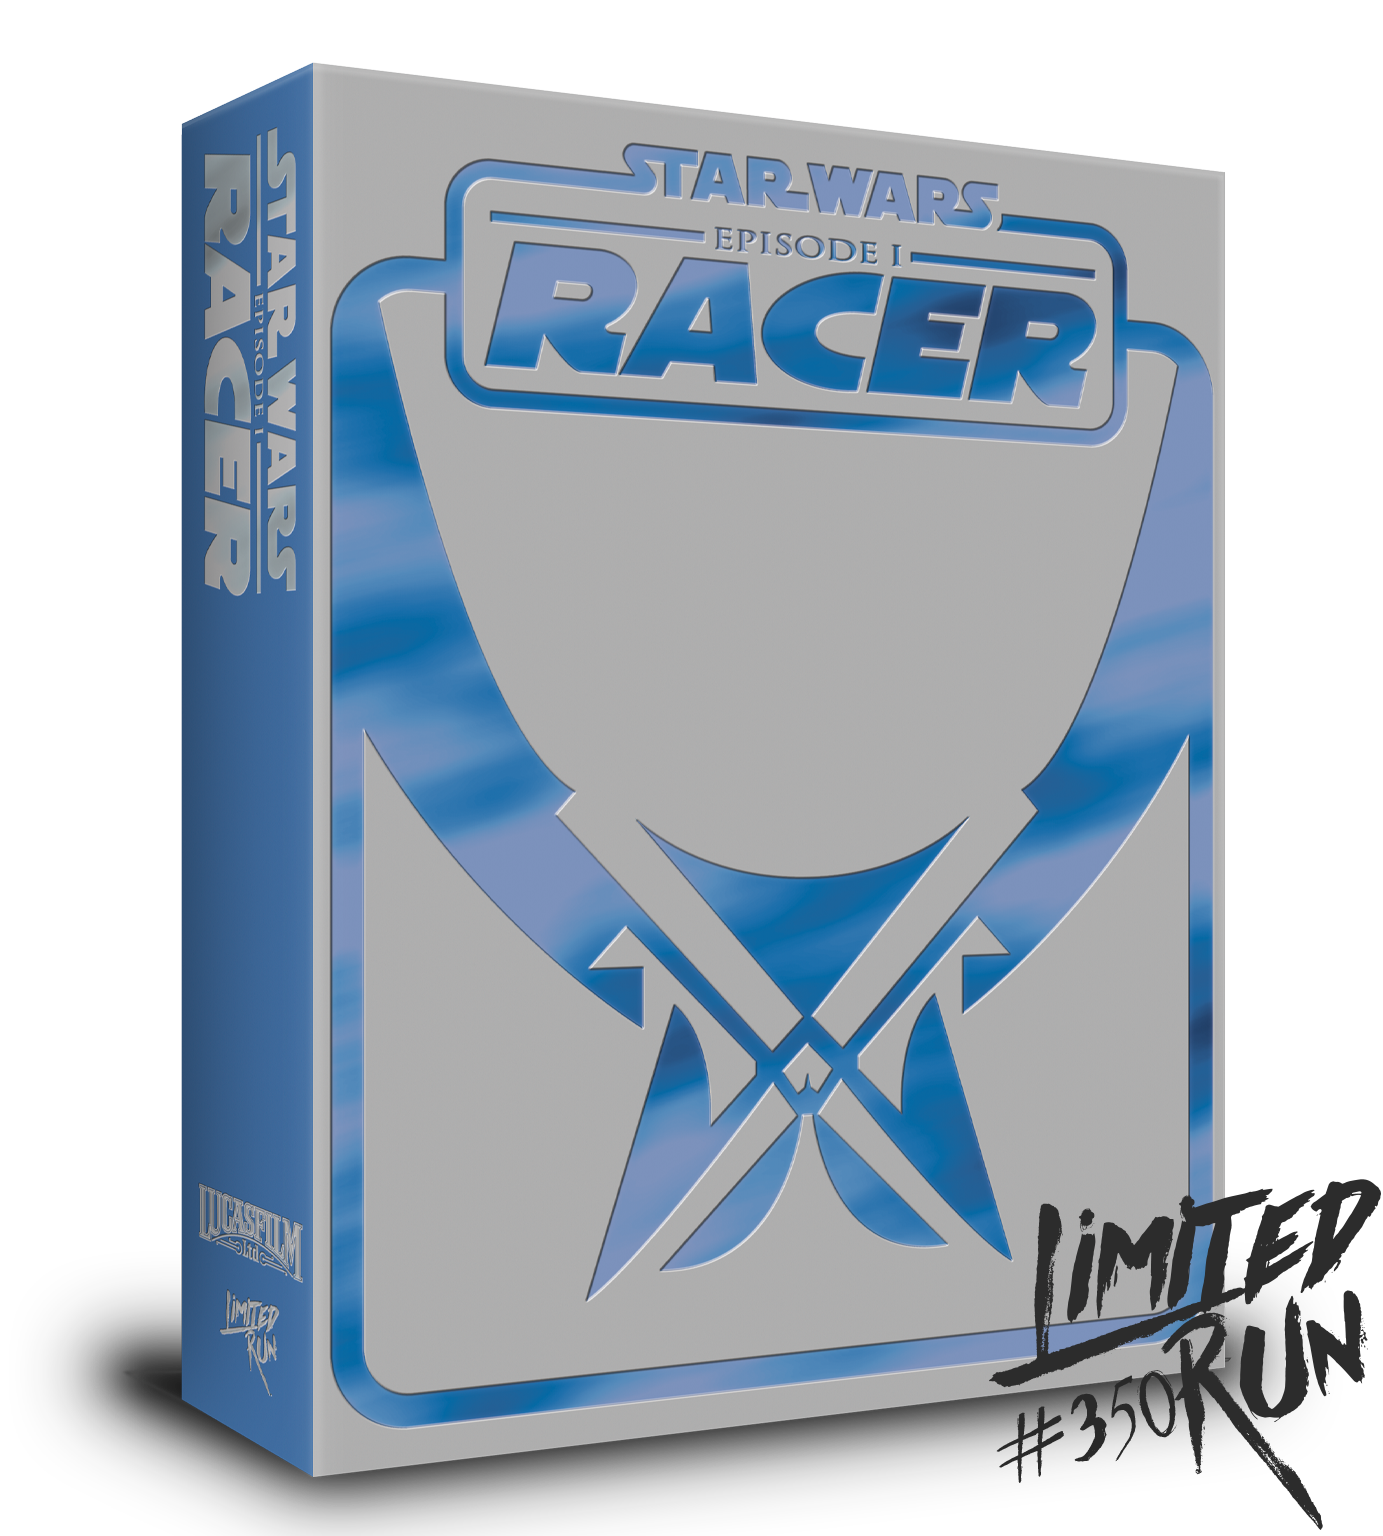 Star Wars Episode 1: Racer Premium Edition (Limited Run Games) - PS4